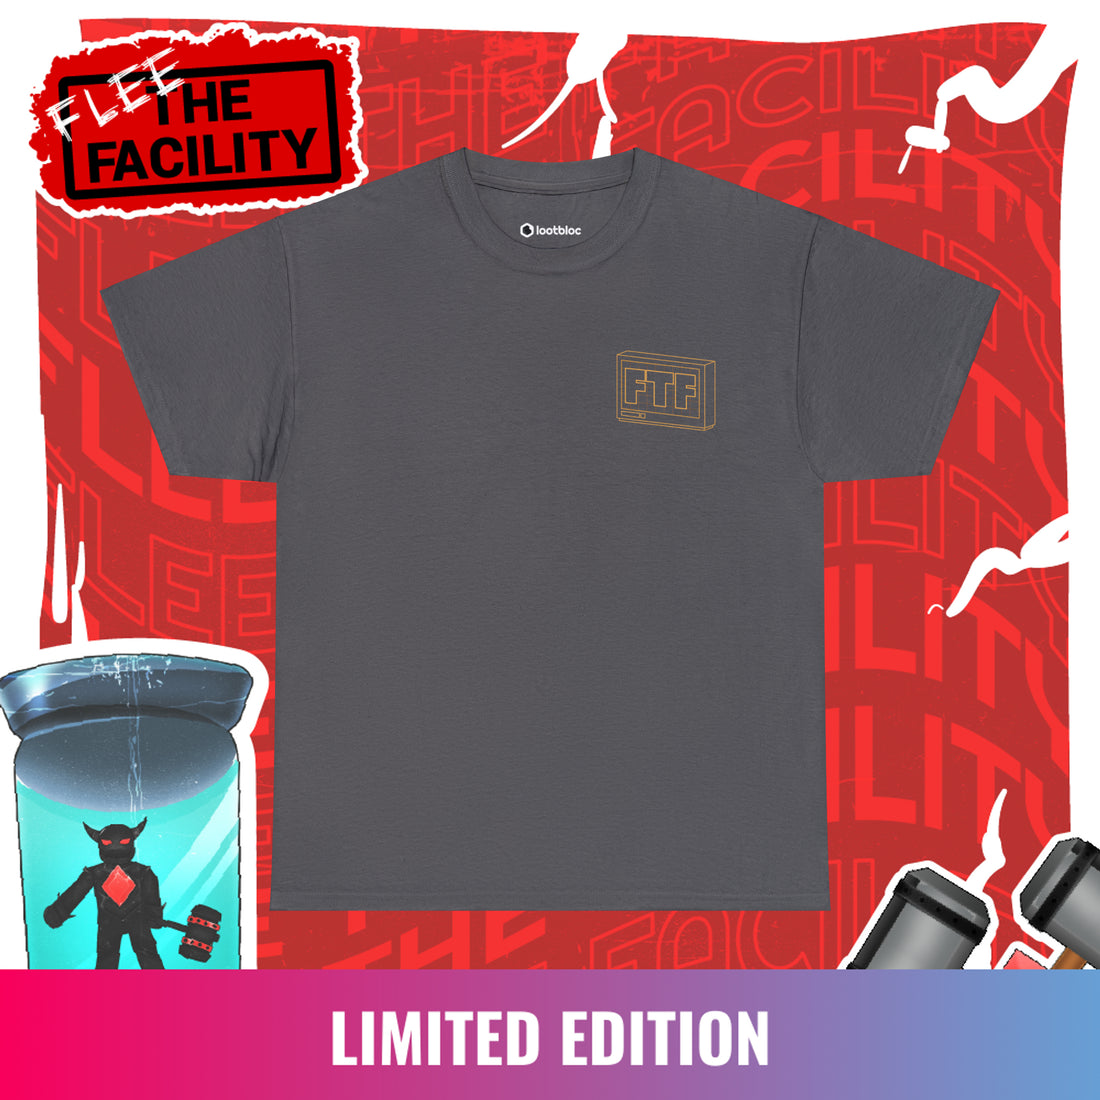 [LIMITED] Flee The Facility - 6th Anniversary Edition Tee